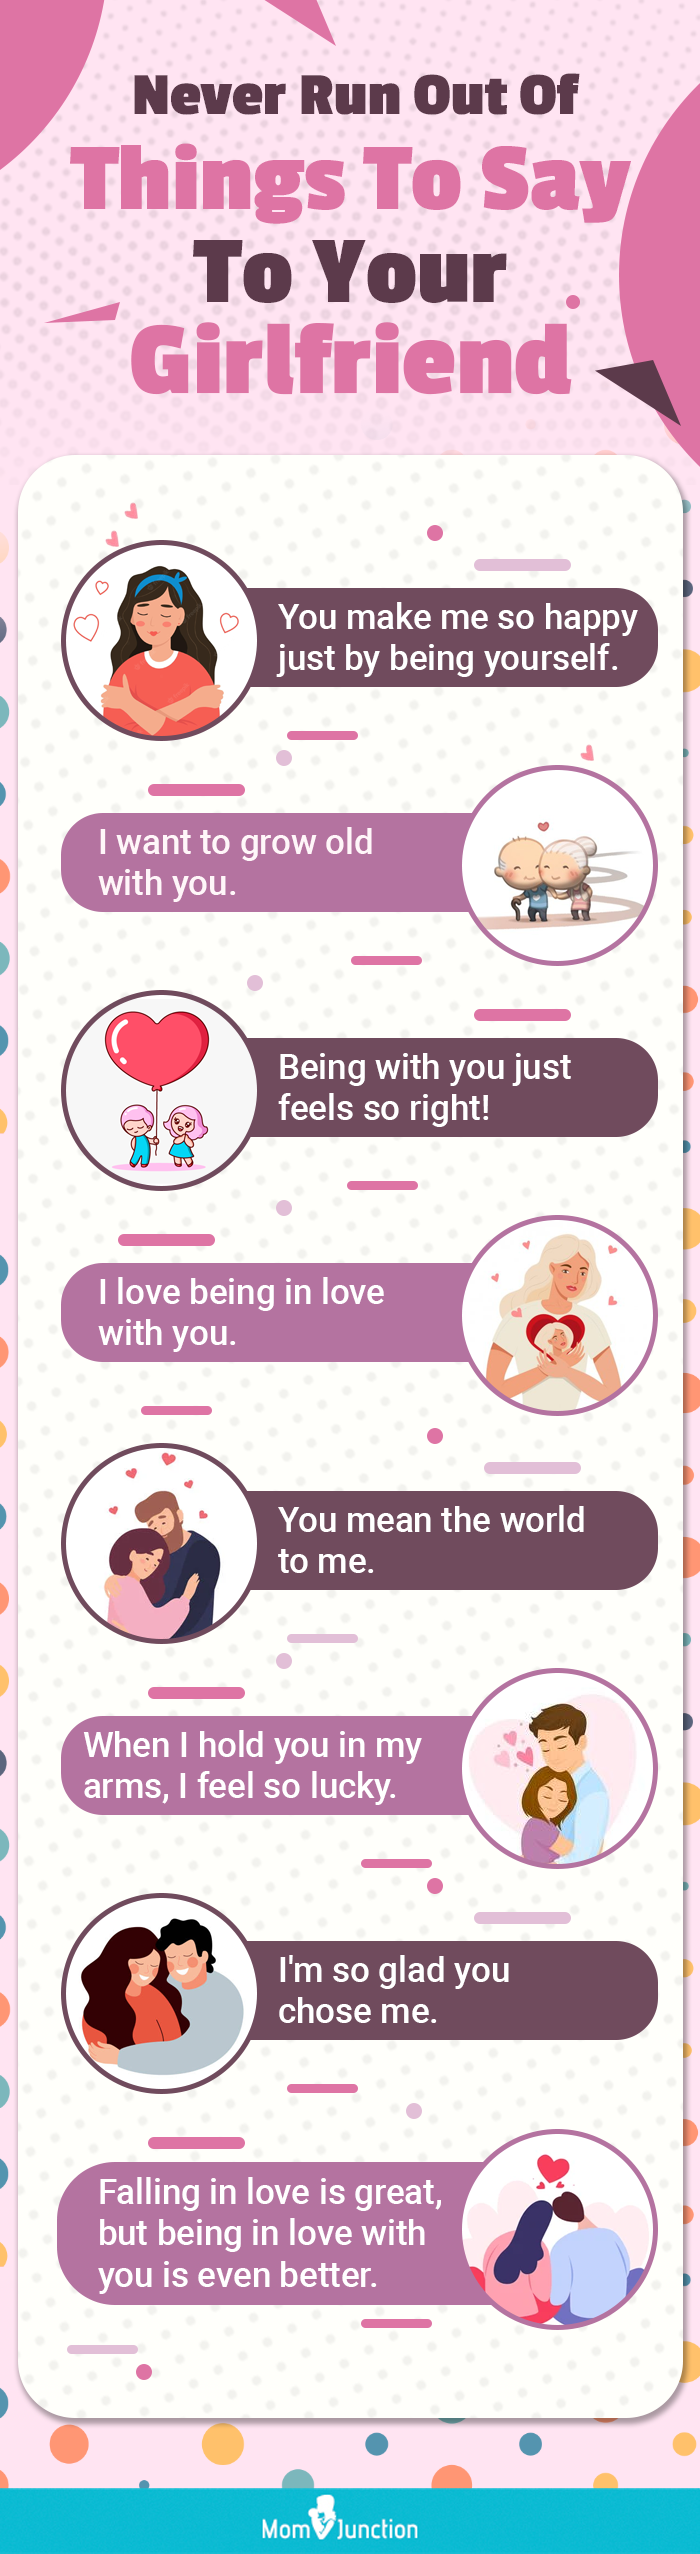 never run out of things to say to your gf [infographic]